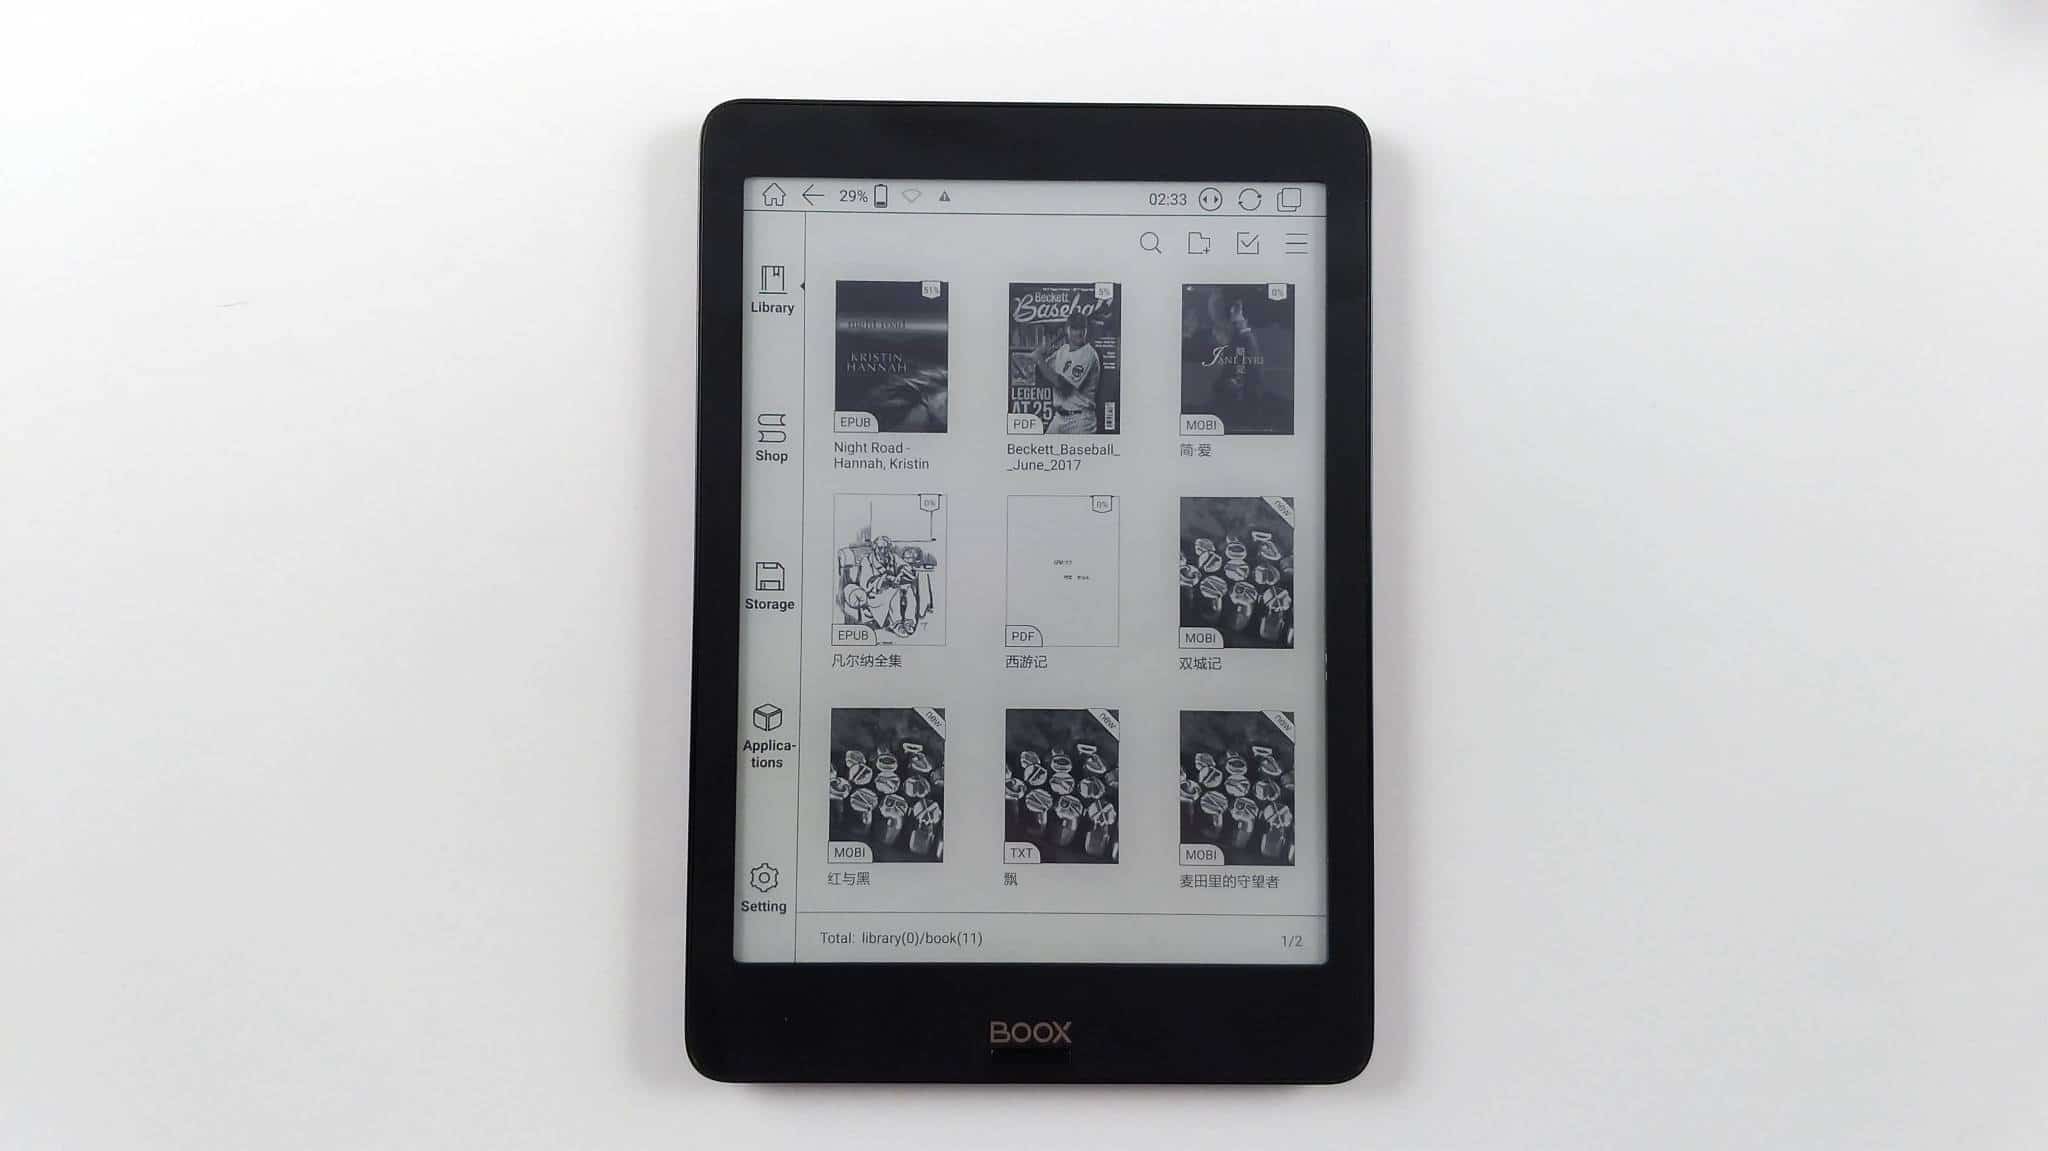 Onyx Boox Leaf Review – A solid e-reader with Google Play - Good e-Reader